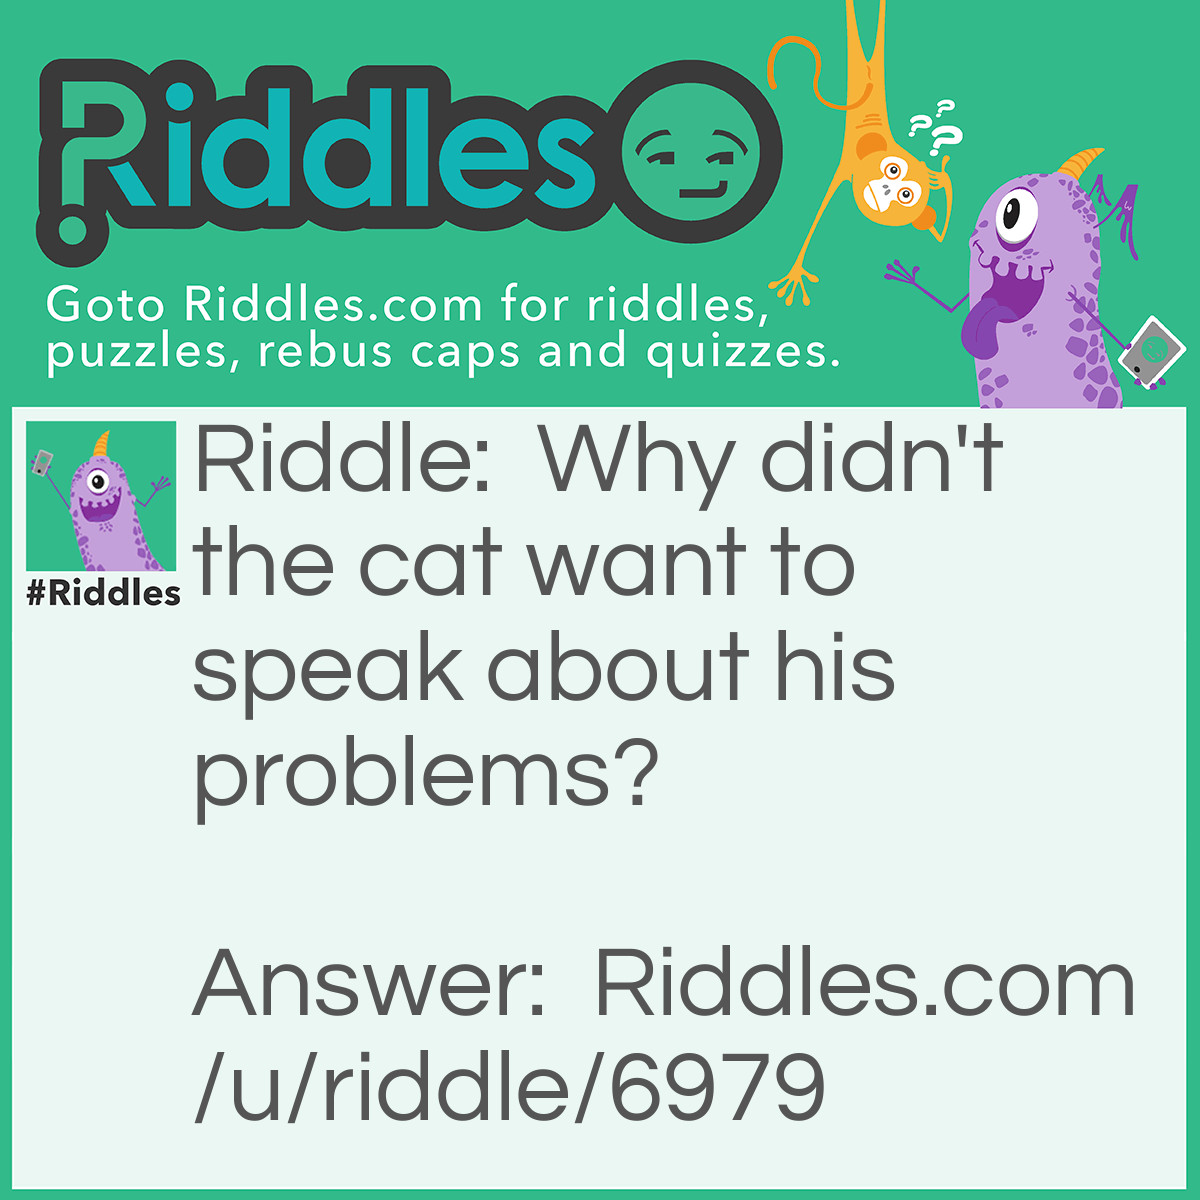 Riddle: Why didn't the cat want to speak about his problems? Answer: Because it's purr-sonal information!